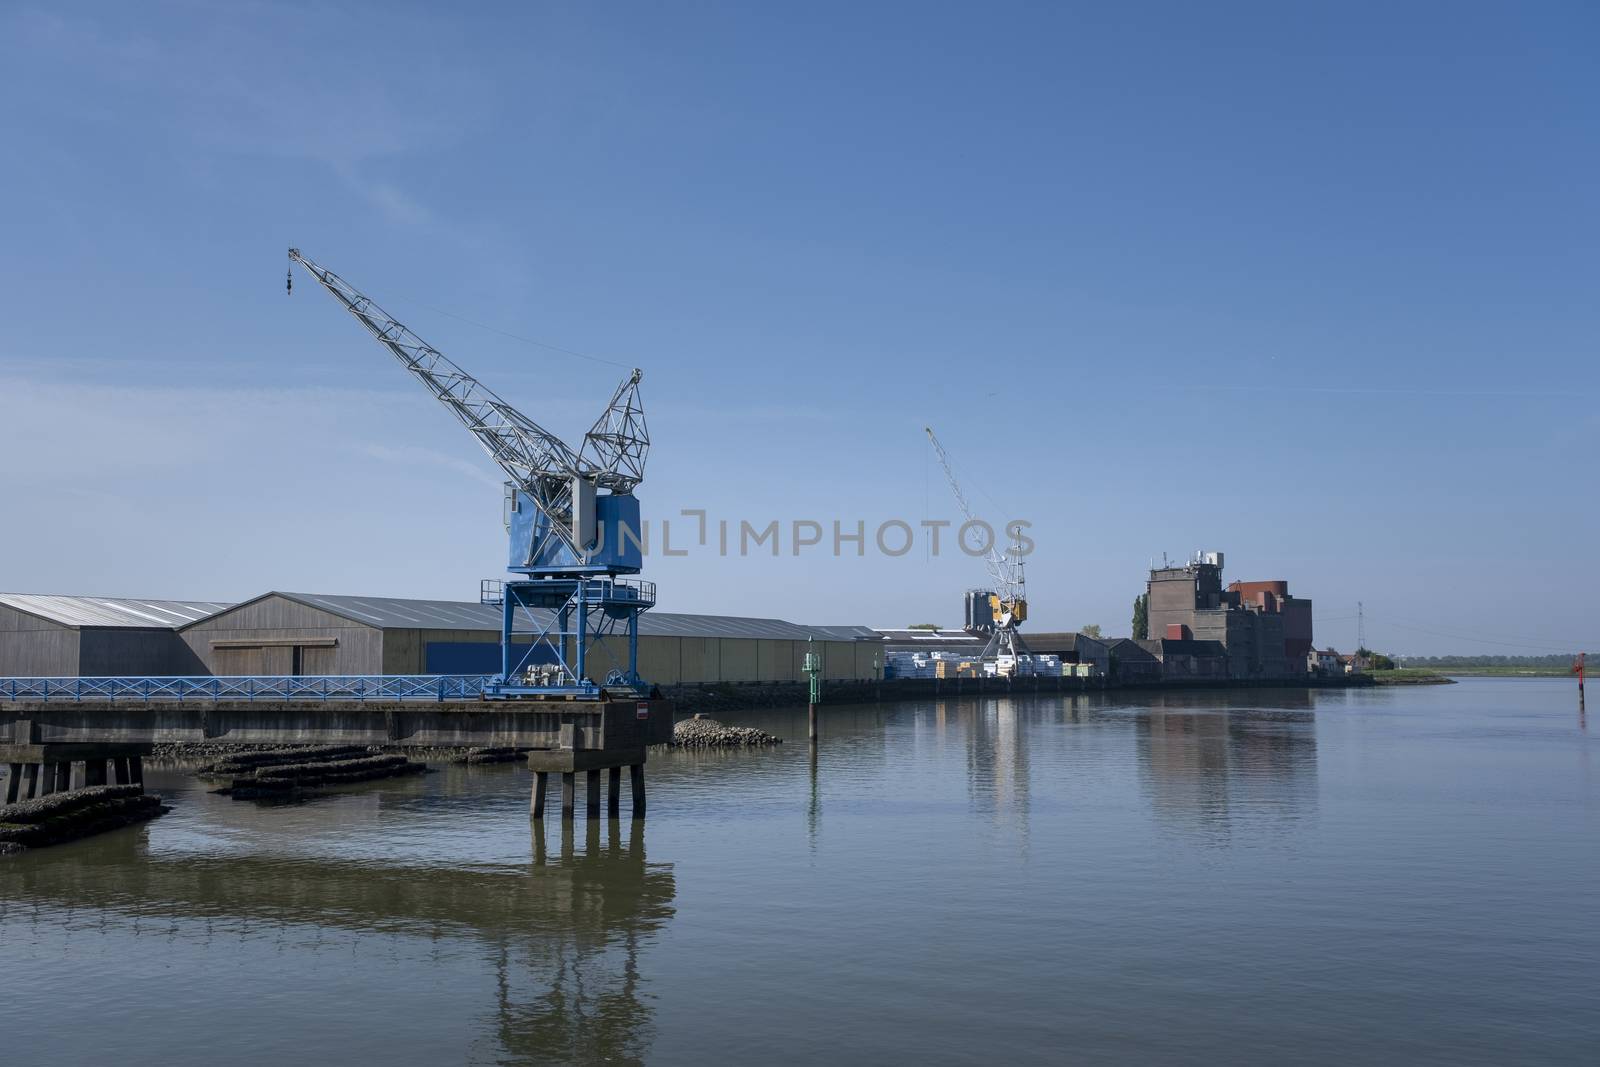 Cranes near the river against blue sky. Industrial landscape, industrial zone.